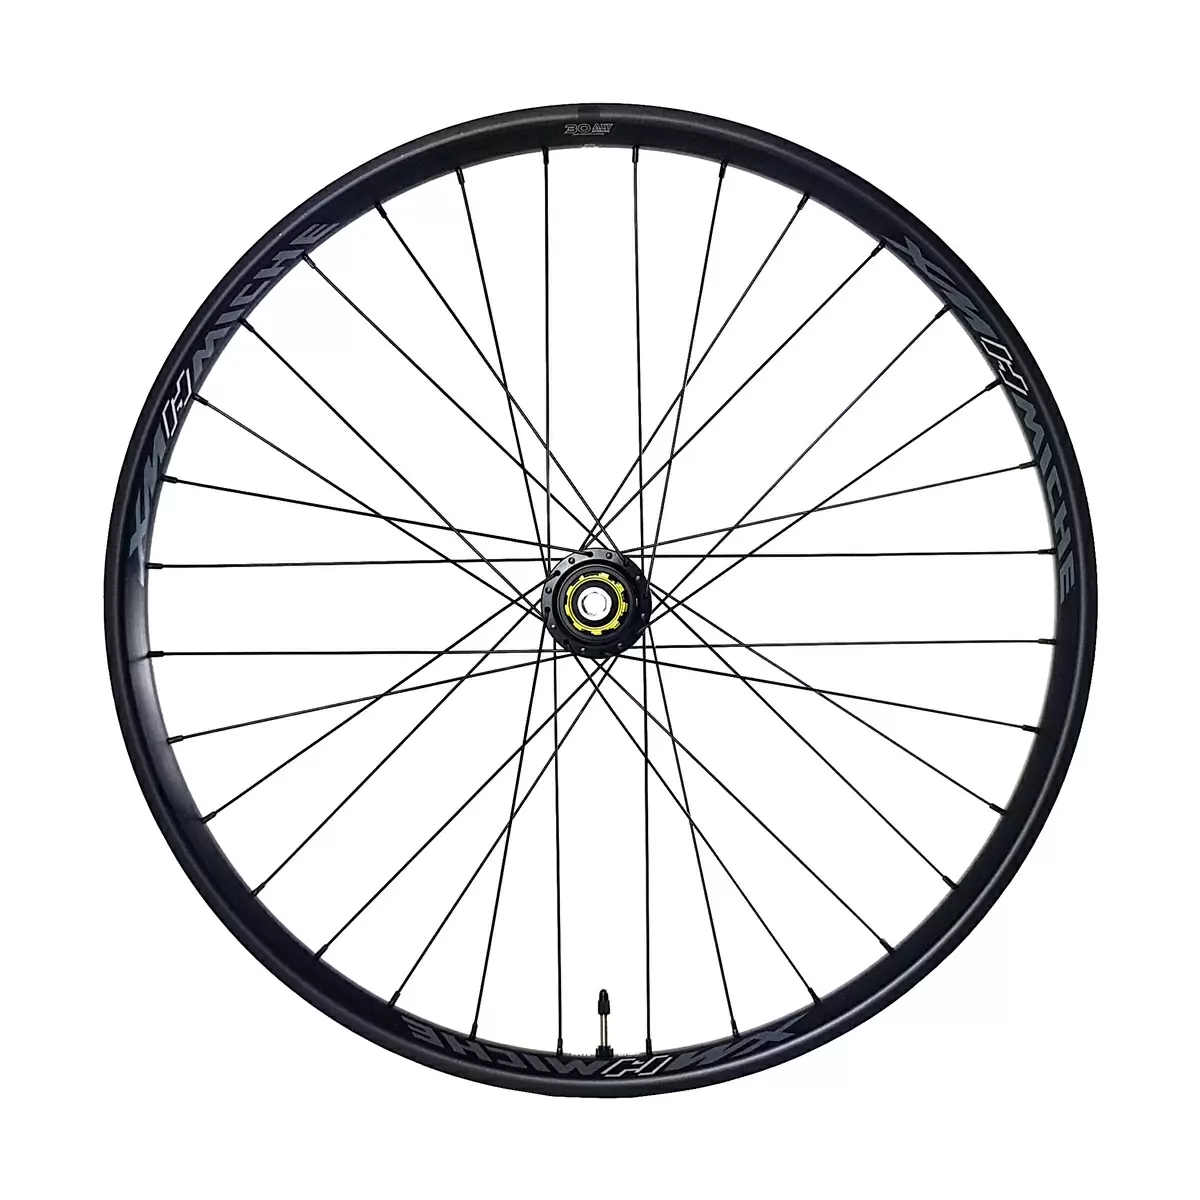 Ruota posteriore Boost ebike 29'' XMH30 AXY canale interno 30mm 10/11v Tubeless ready #1